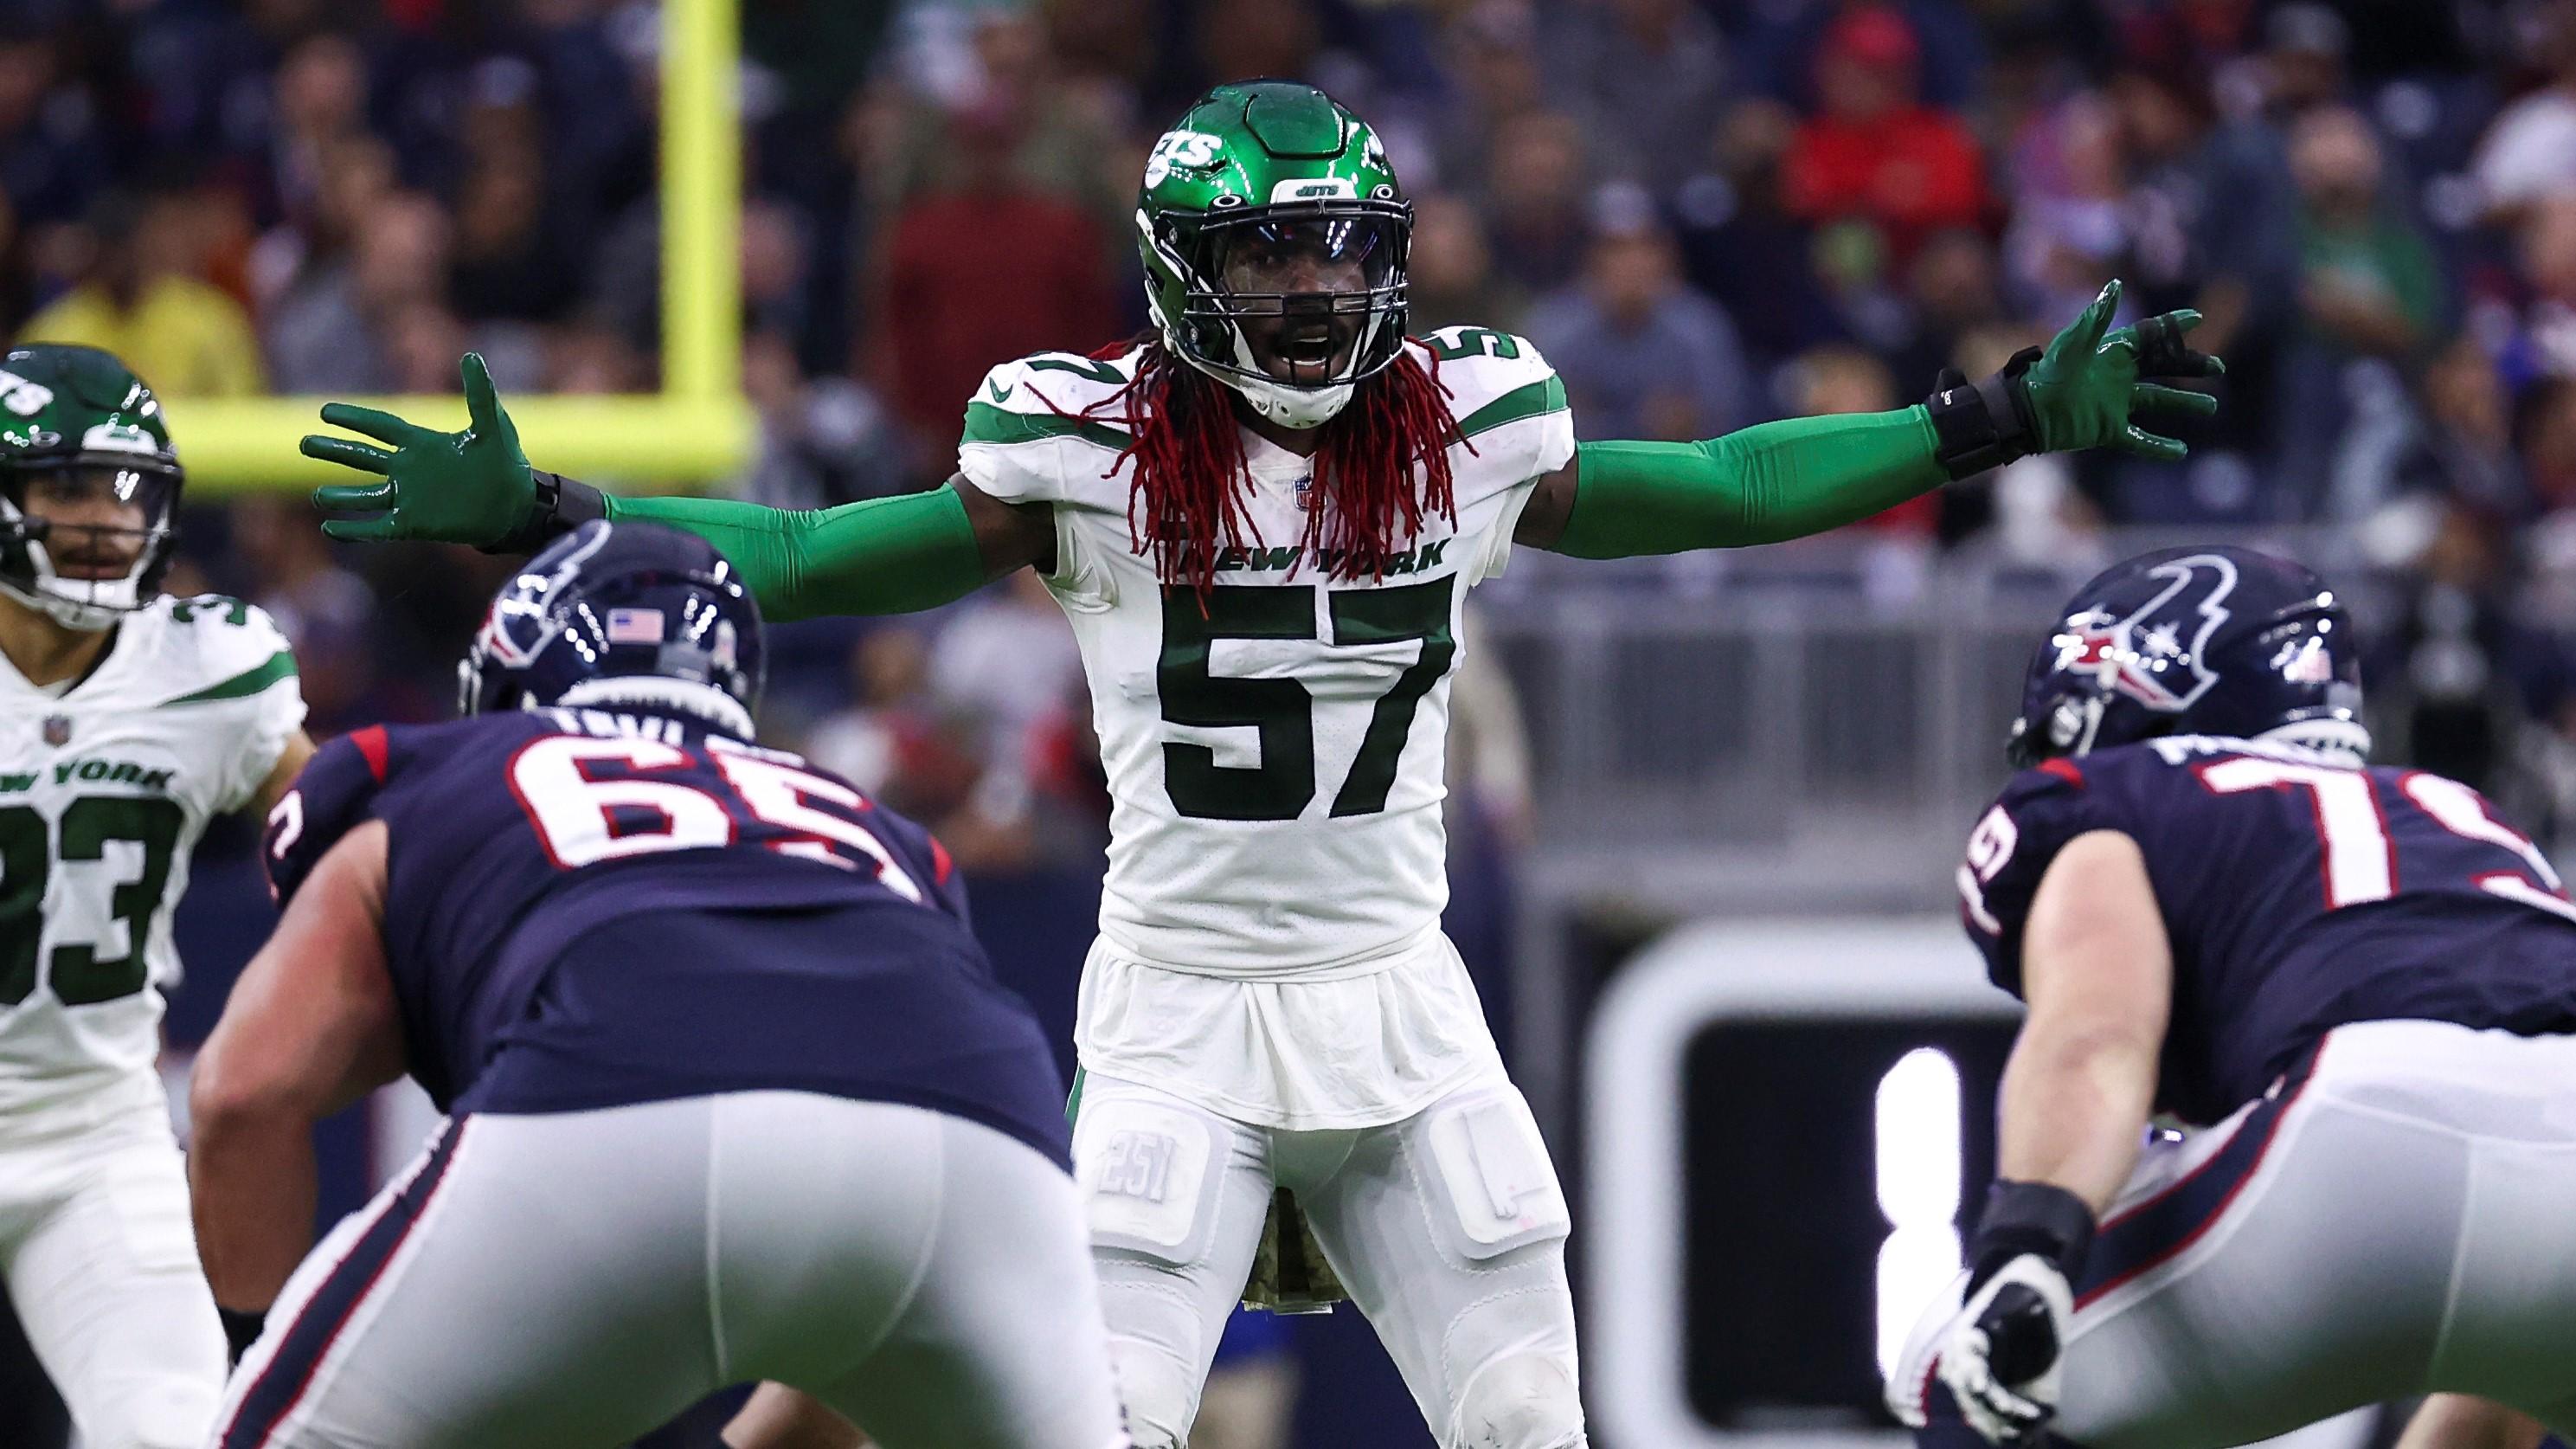 New York Jets middle linebacker C.J. Mosley (57) reacts before a play during the fourth quarter against the Houston Texans at NRG Stadium. / Troy Taormina-USA TODAY Sports